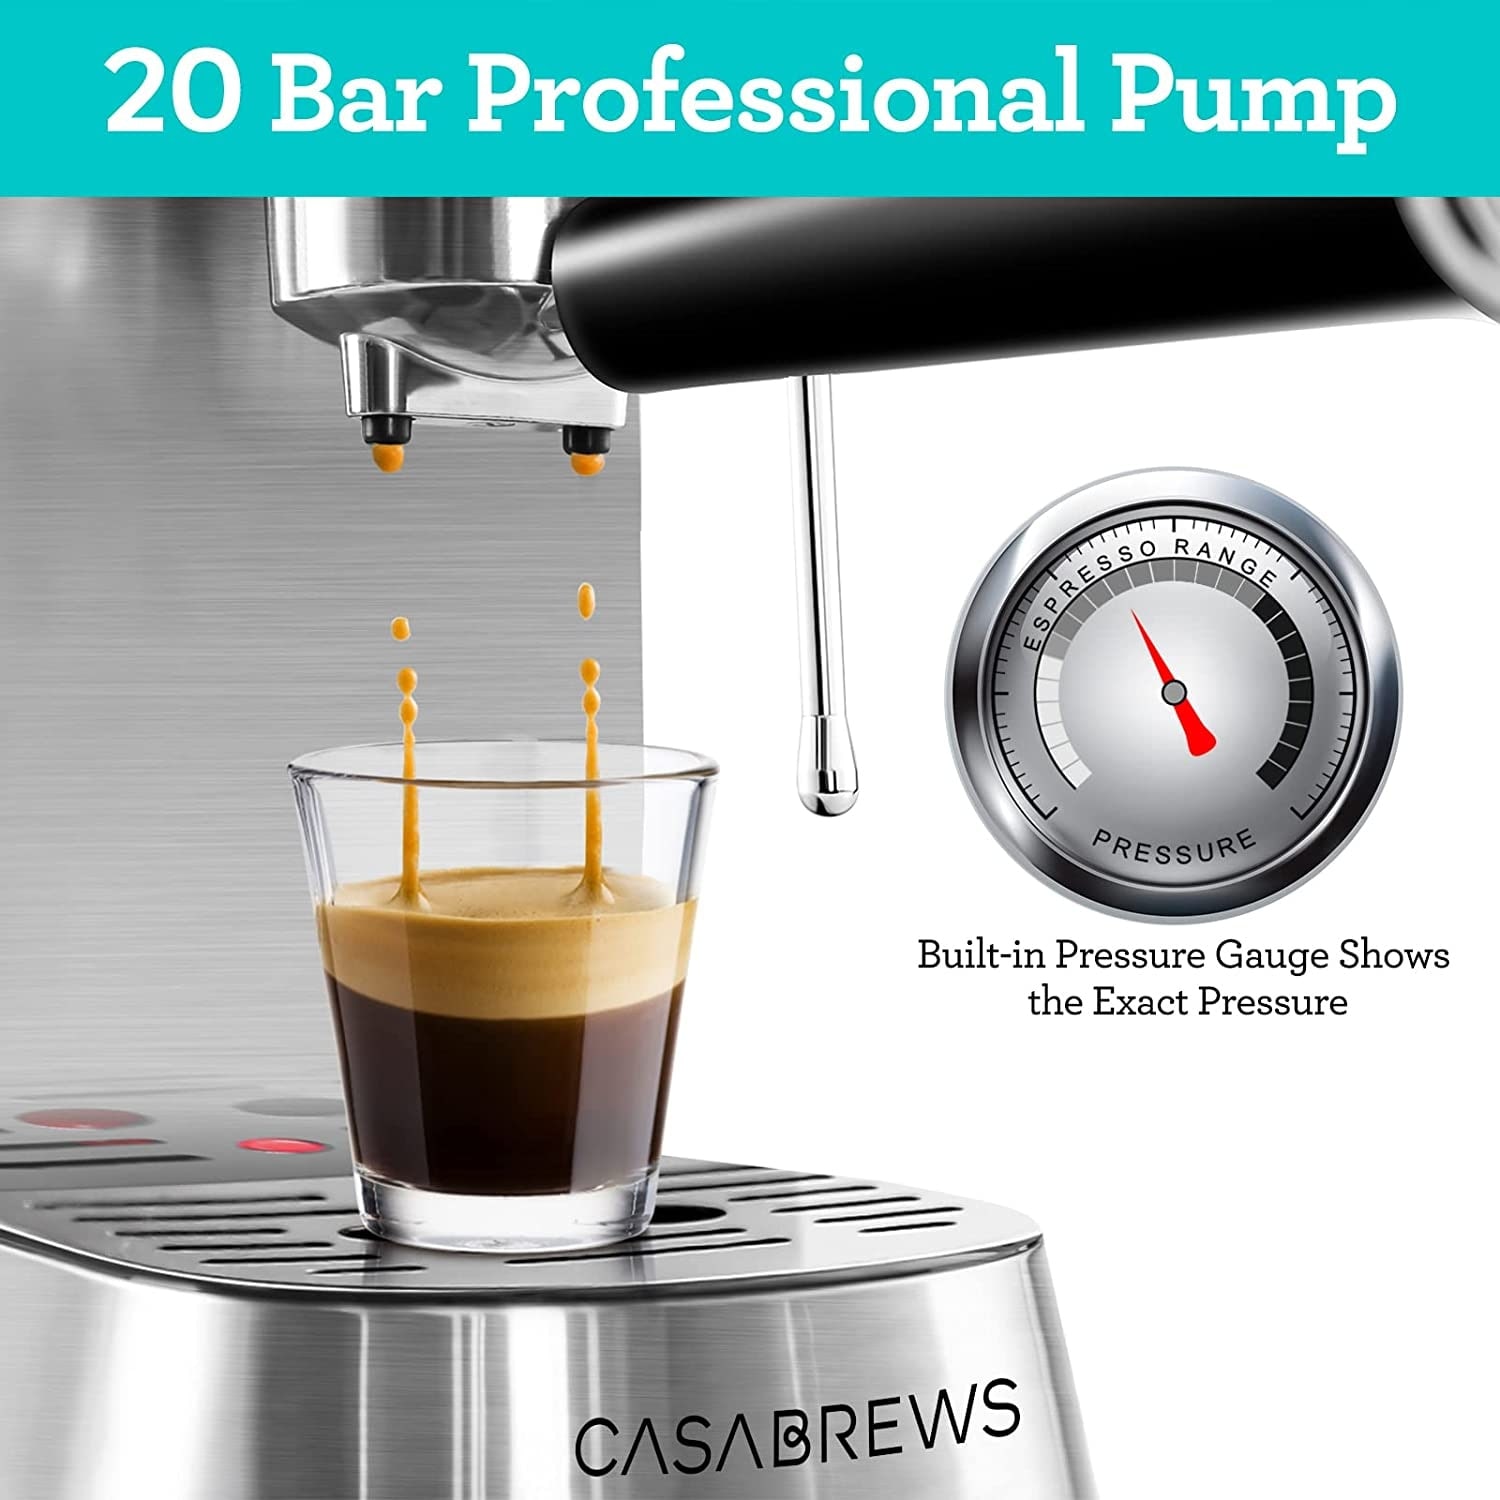 https://ak1.ostkcdn.com/images/products/is/images/direct/750e3f3f8616273703c9db9351e9bd53e89dc39b/CASABREWS-CM5418-Espresso-Machine-20Bar-with-Stainless-Steel-Milk-Frother.jpg